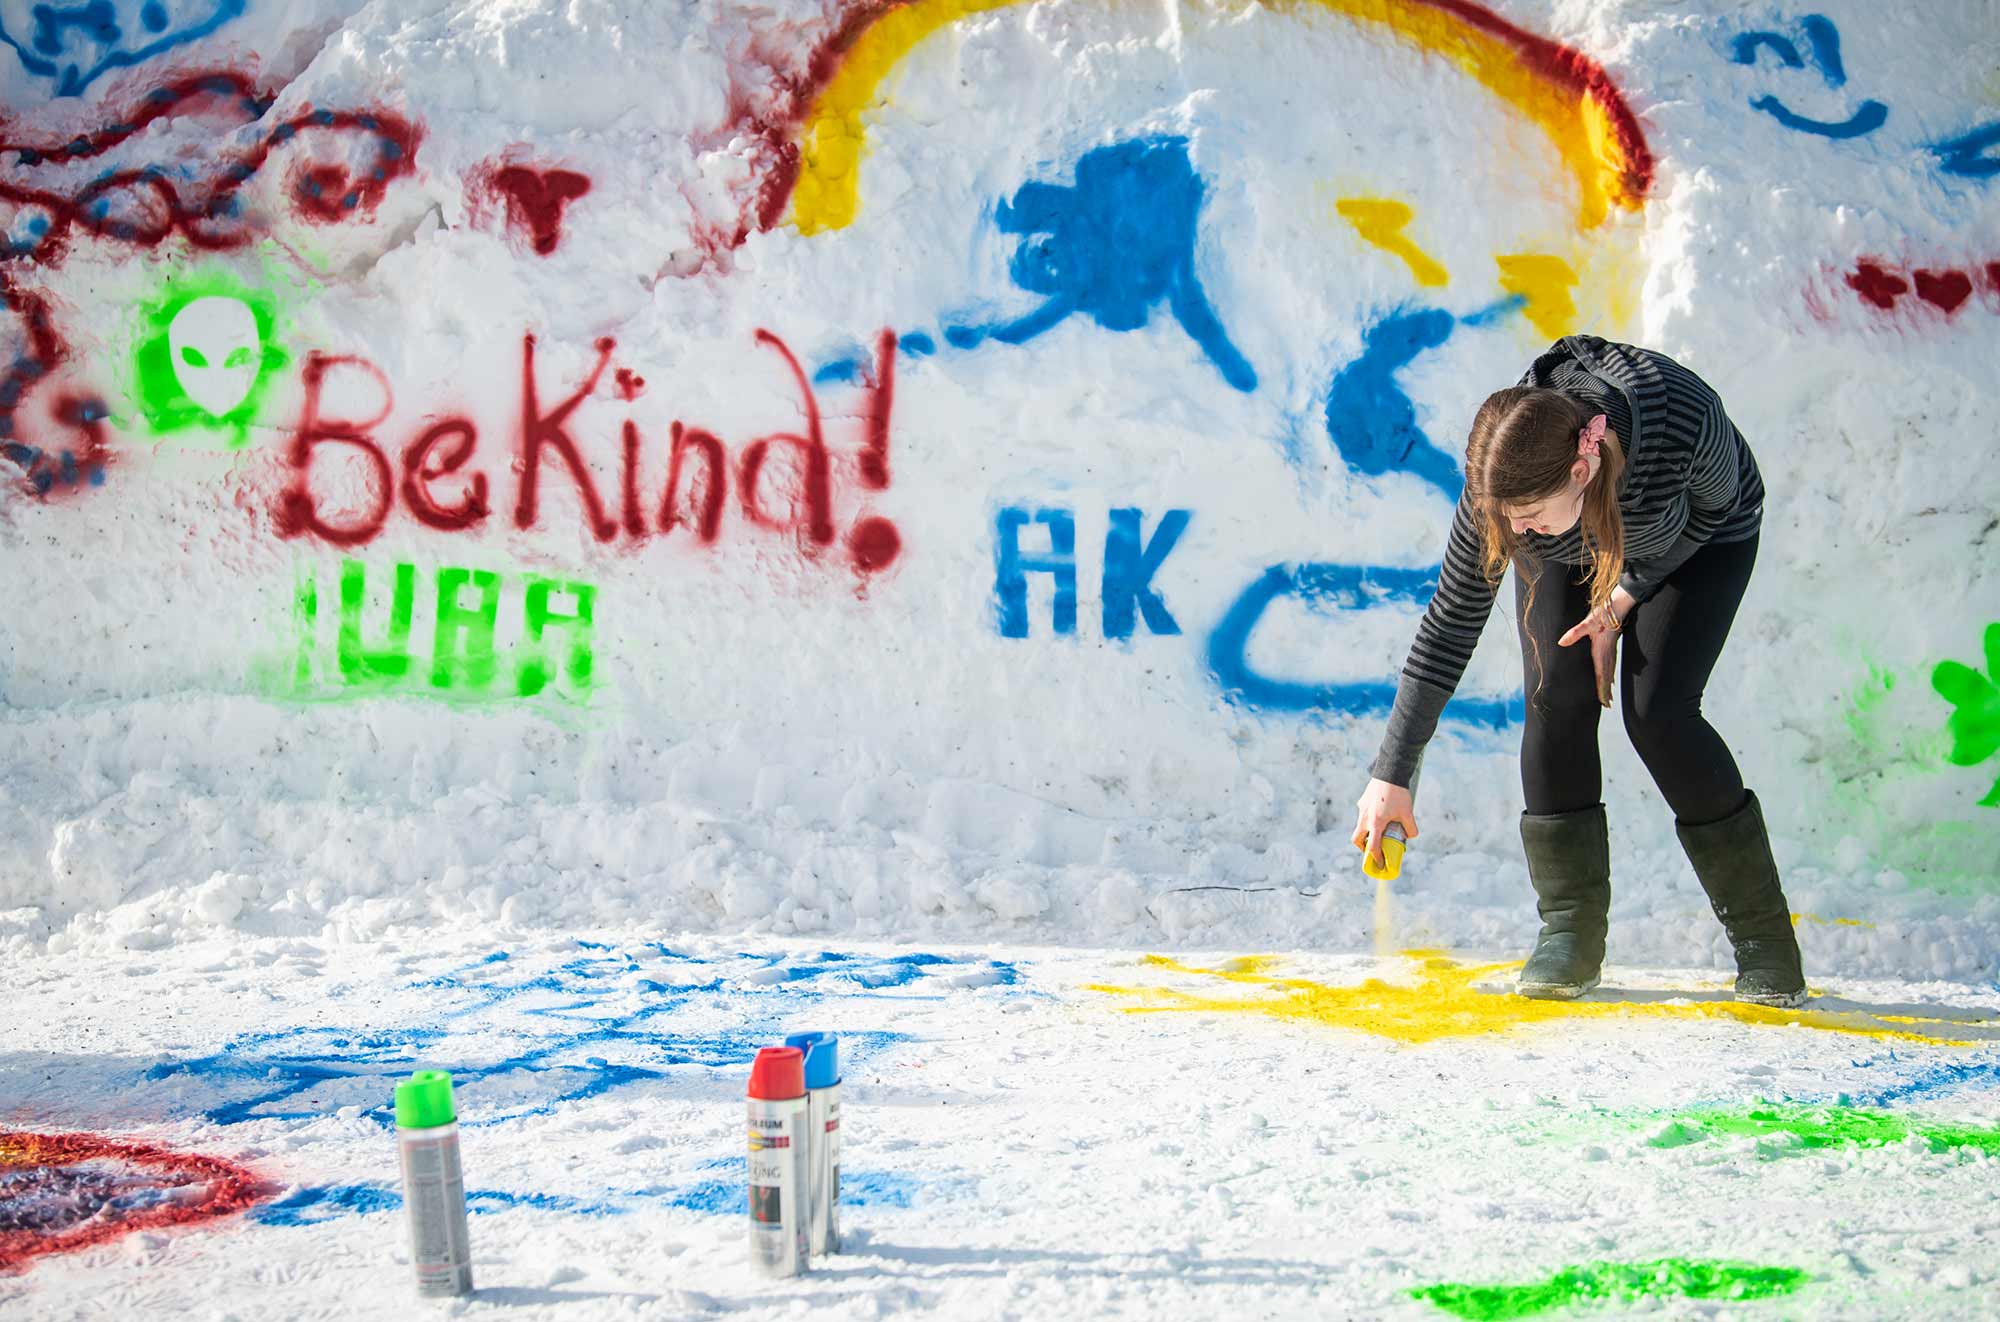 A woman in a dark gray and black striped jacket plus black sweatpant leggings with dark olive green boots sprays down a yellow dye color onto some snow on the ground with her finger pressed onto the top of a chrome colored aluminum canister bottle as she decorates all over the snow many different types of graffiti artwork symbols such as a green backdrop alien, phrases such as "Be Kind!", "UAA", "AK", and other variety of shapes (state of Alaska), etc. while there are other chrome colored aluminum canister bottles nearby in green, red, and blue dye colors as part of UAA’s Winterfest Art & Music event in the Cuddy Quad in February 2023.